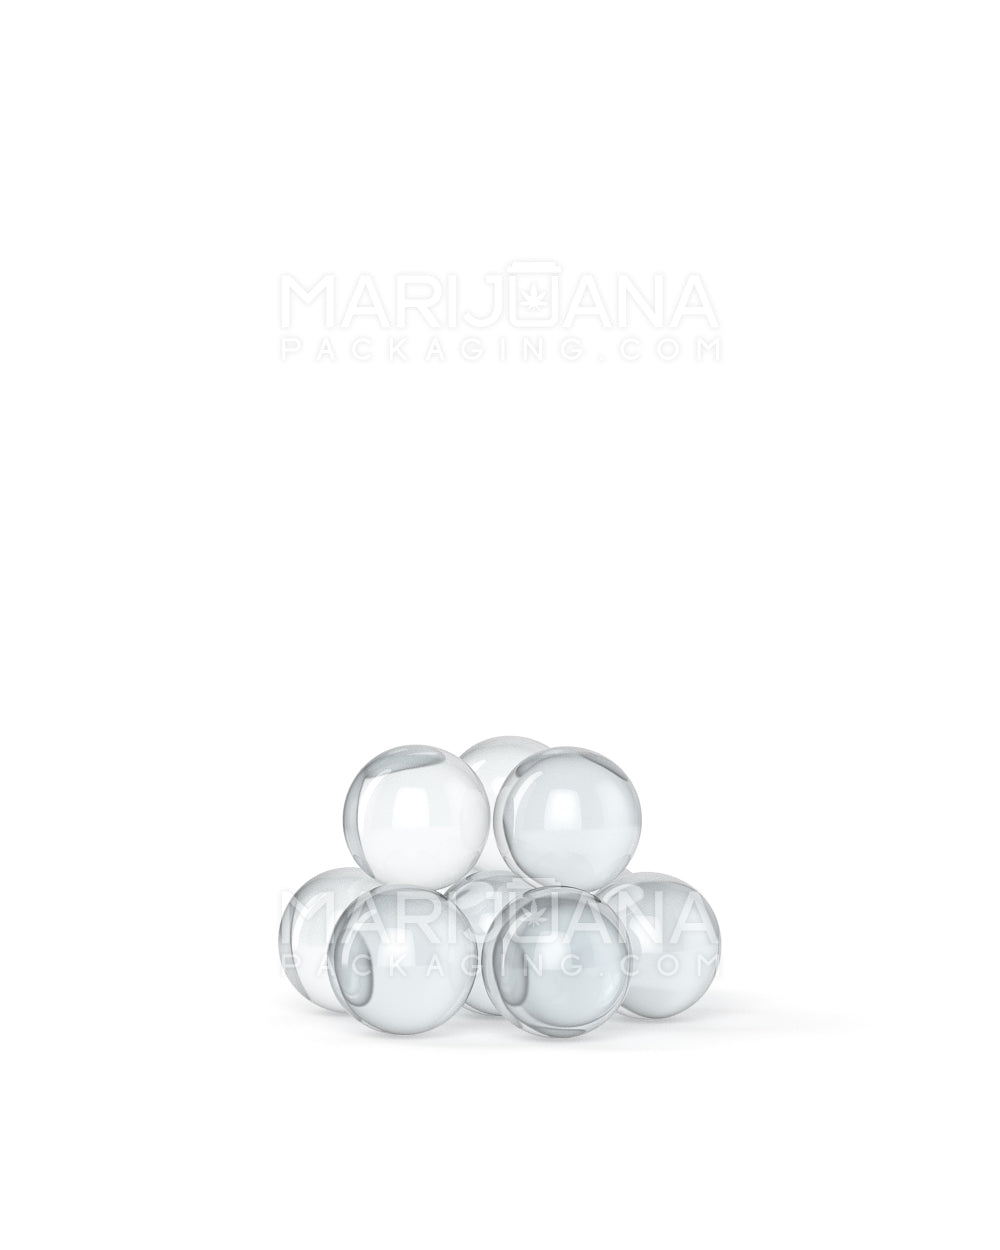 Thick 6mm Quartz Dab Pearls for Banger Nails - 10 Count - 3